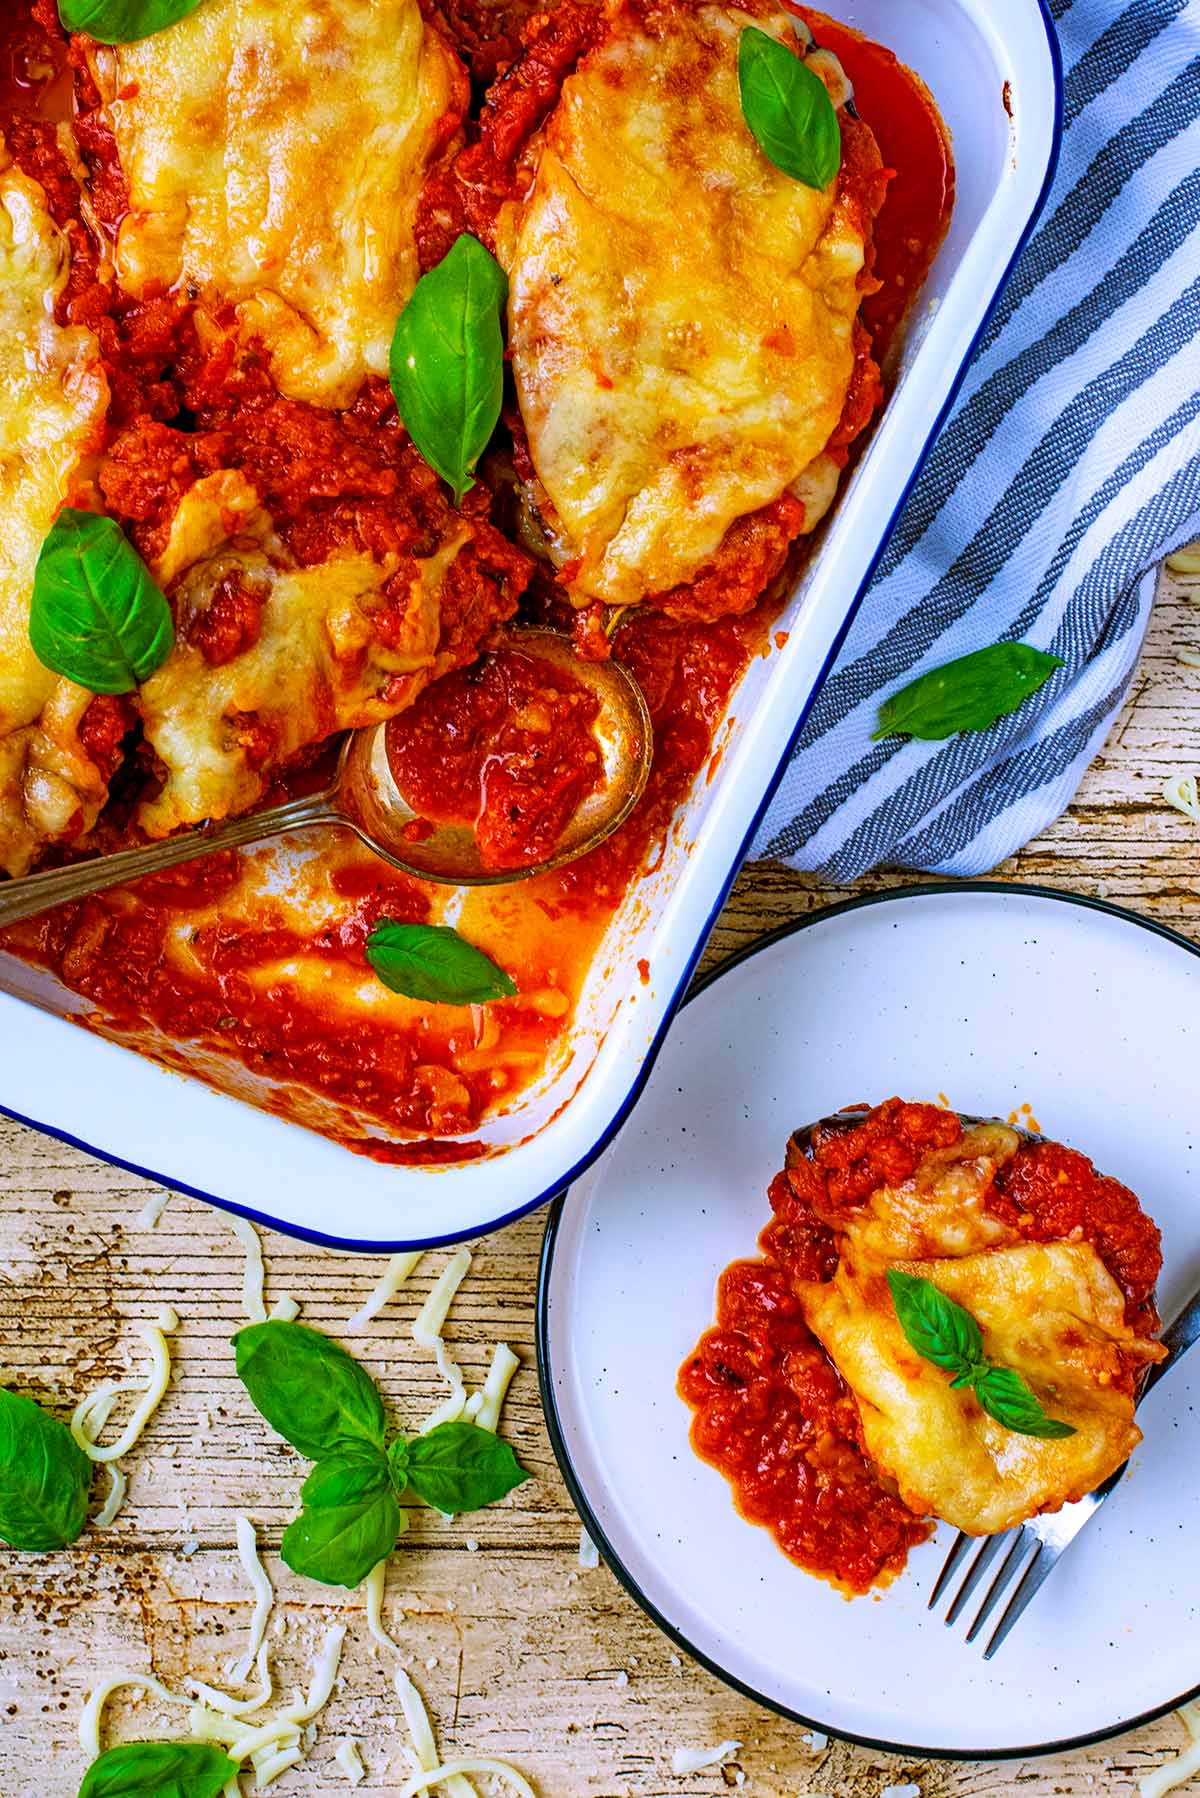 Eggplant Parmesan in a baking tray. A portion removed and put on a plate.